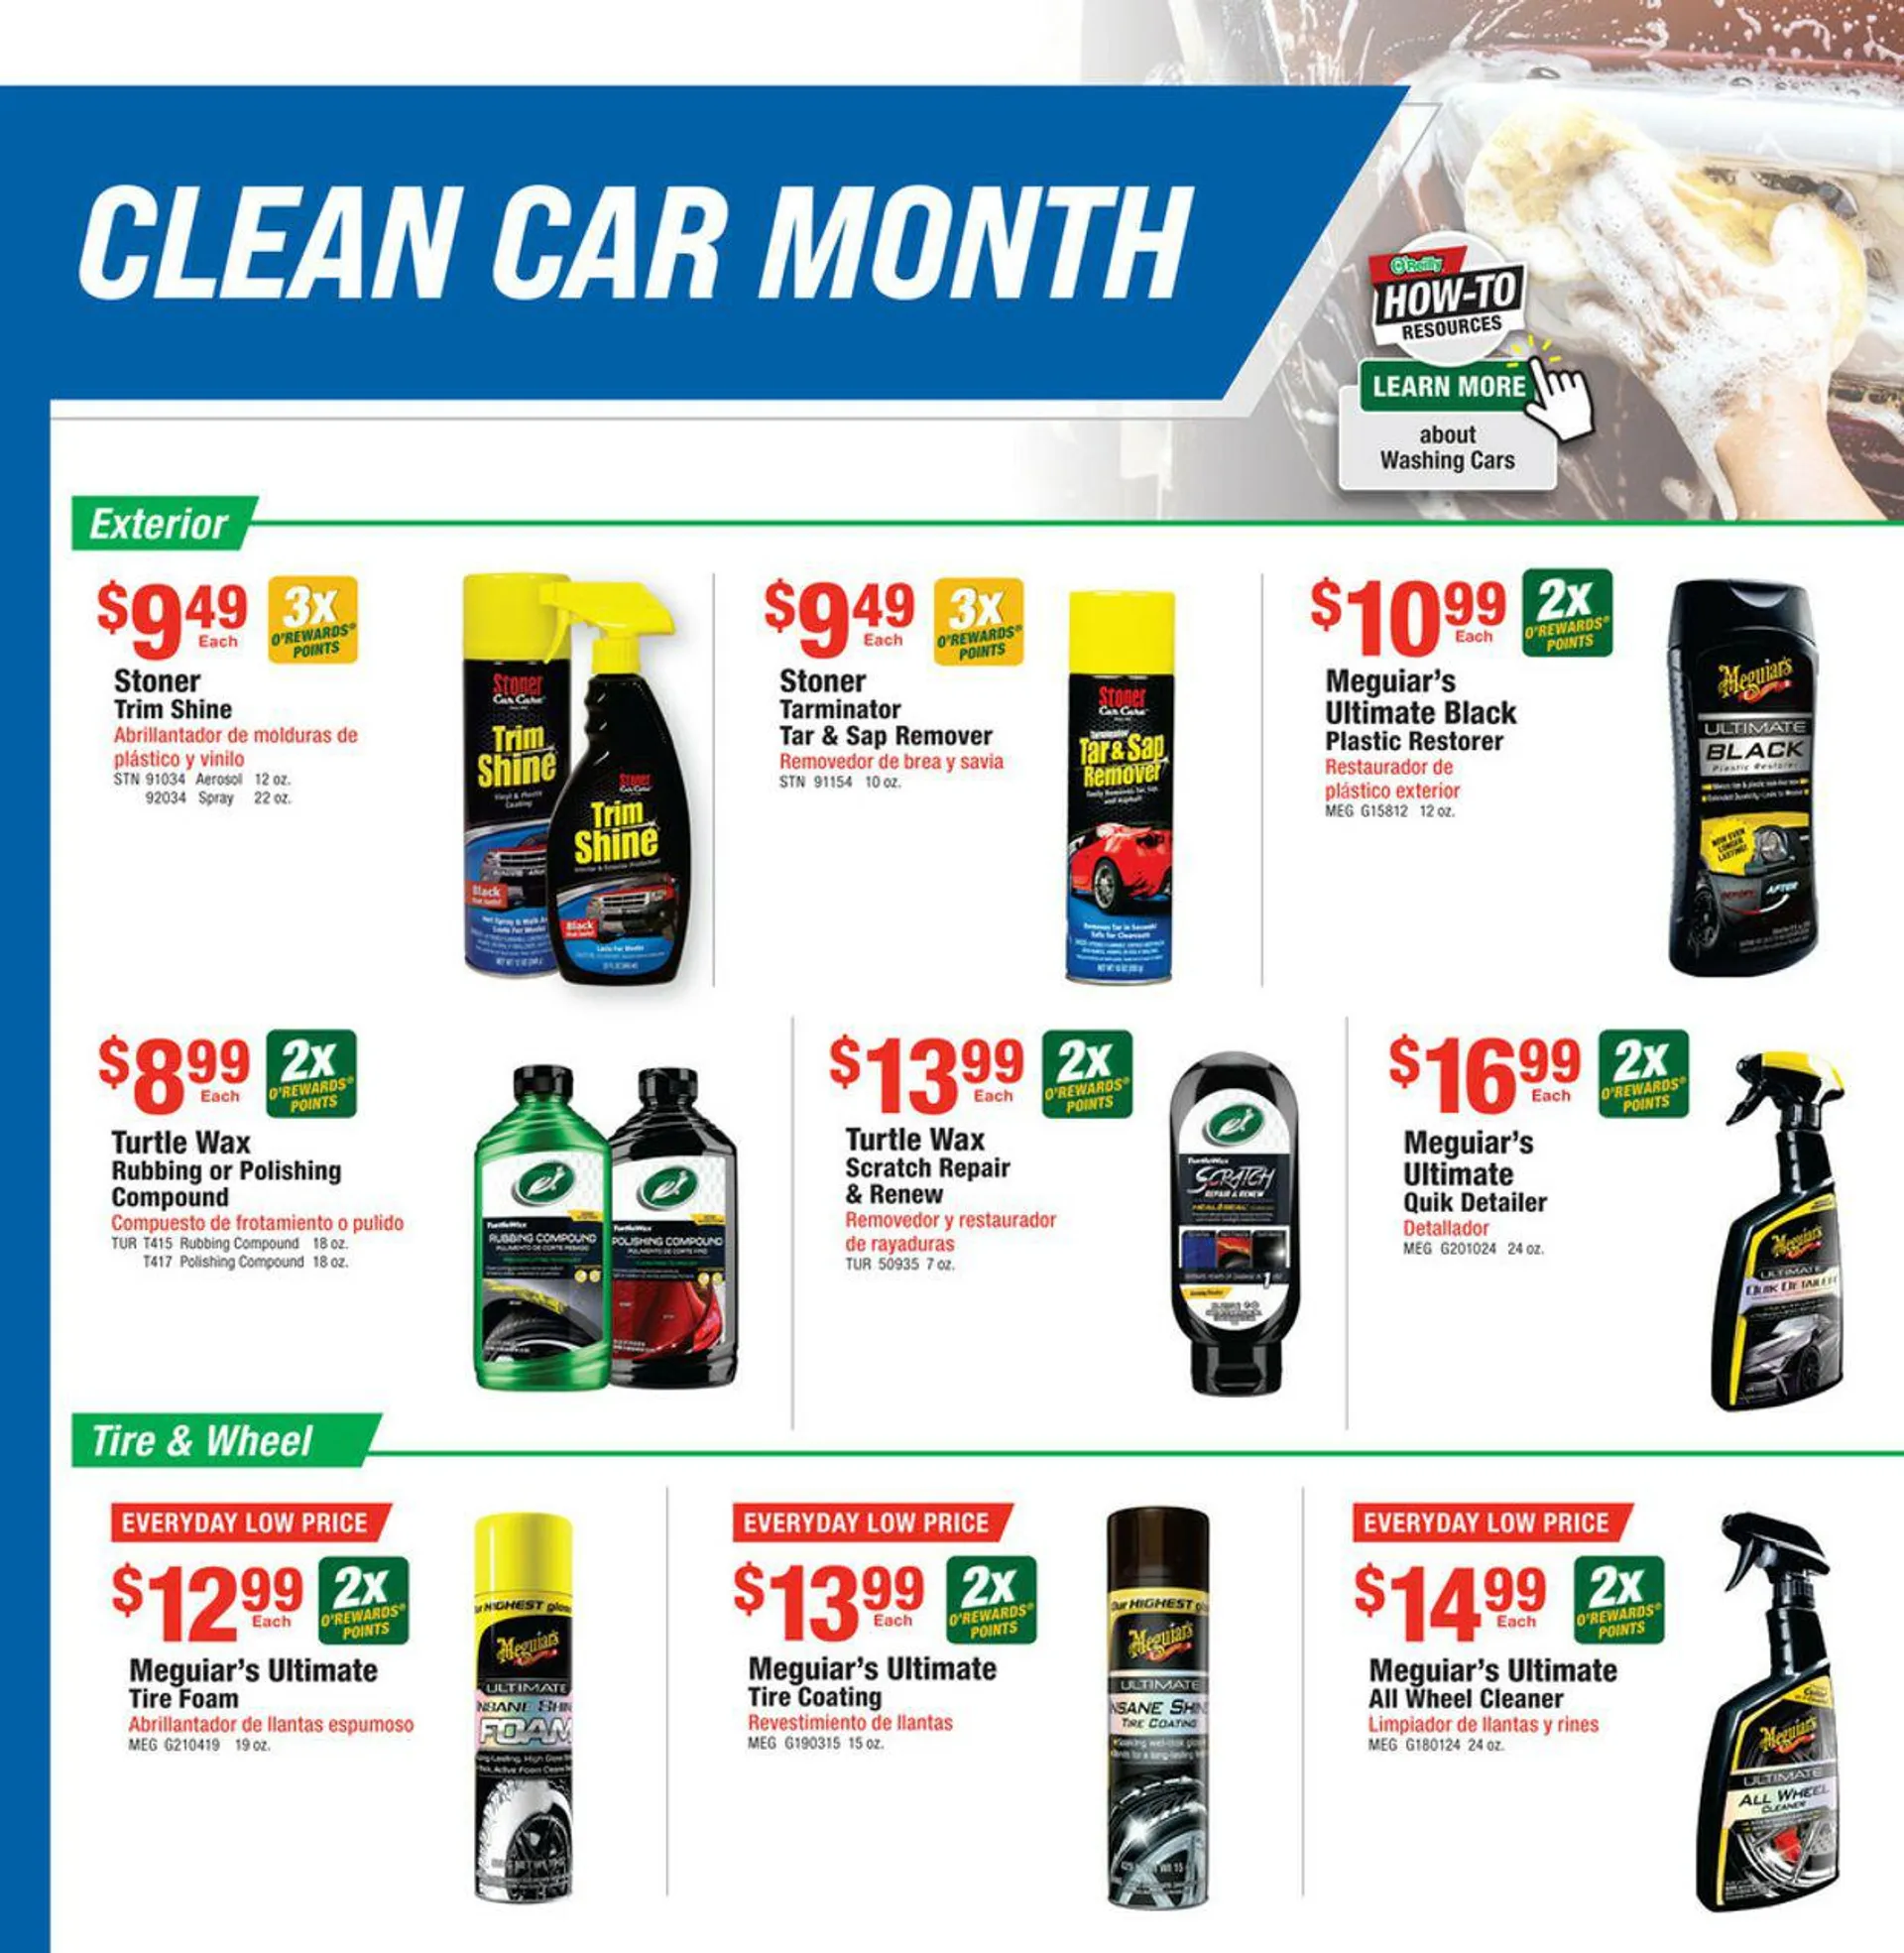 OReilly Auto Parts Current weekly ad - 2